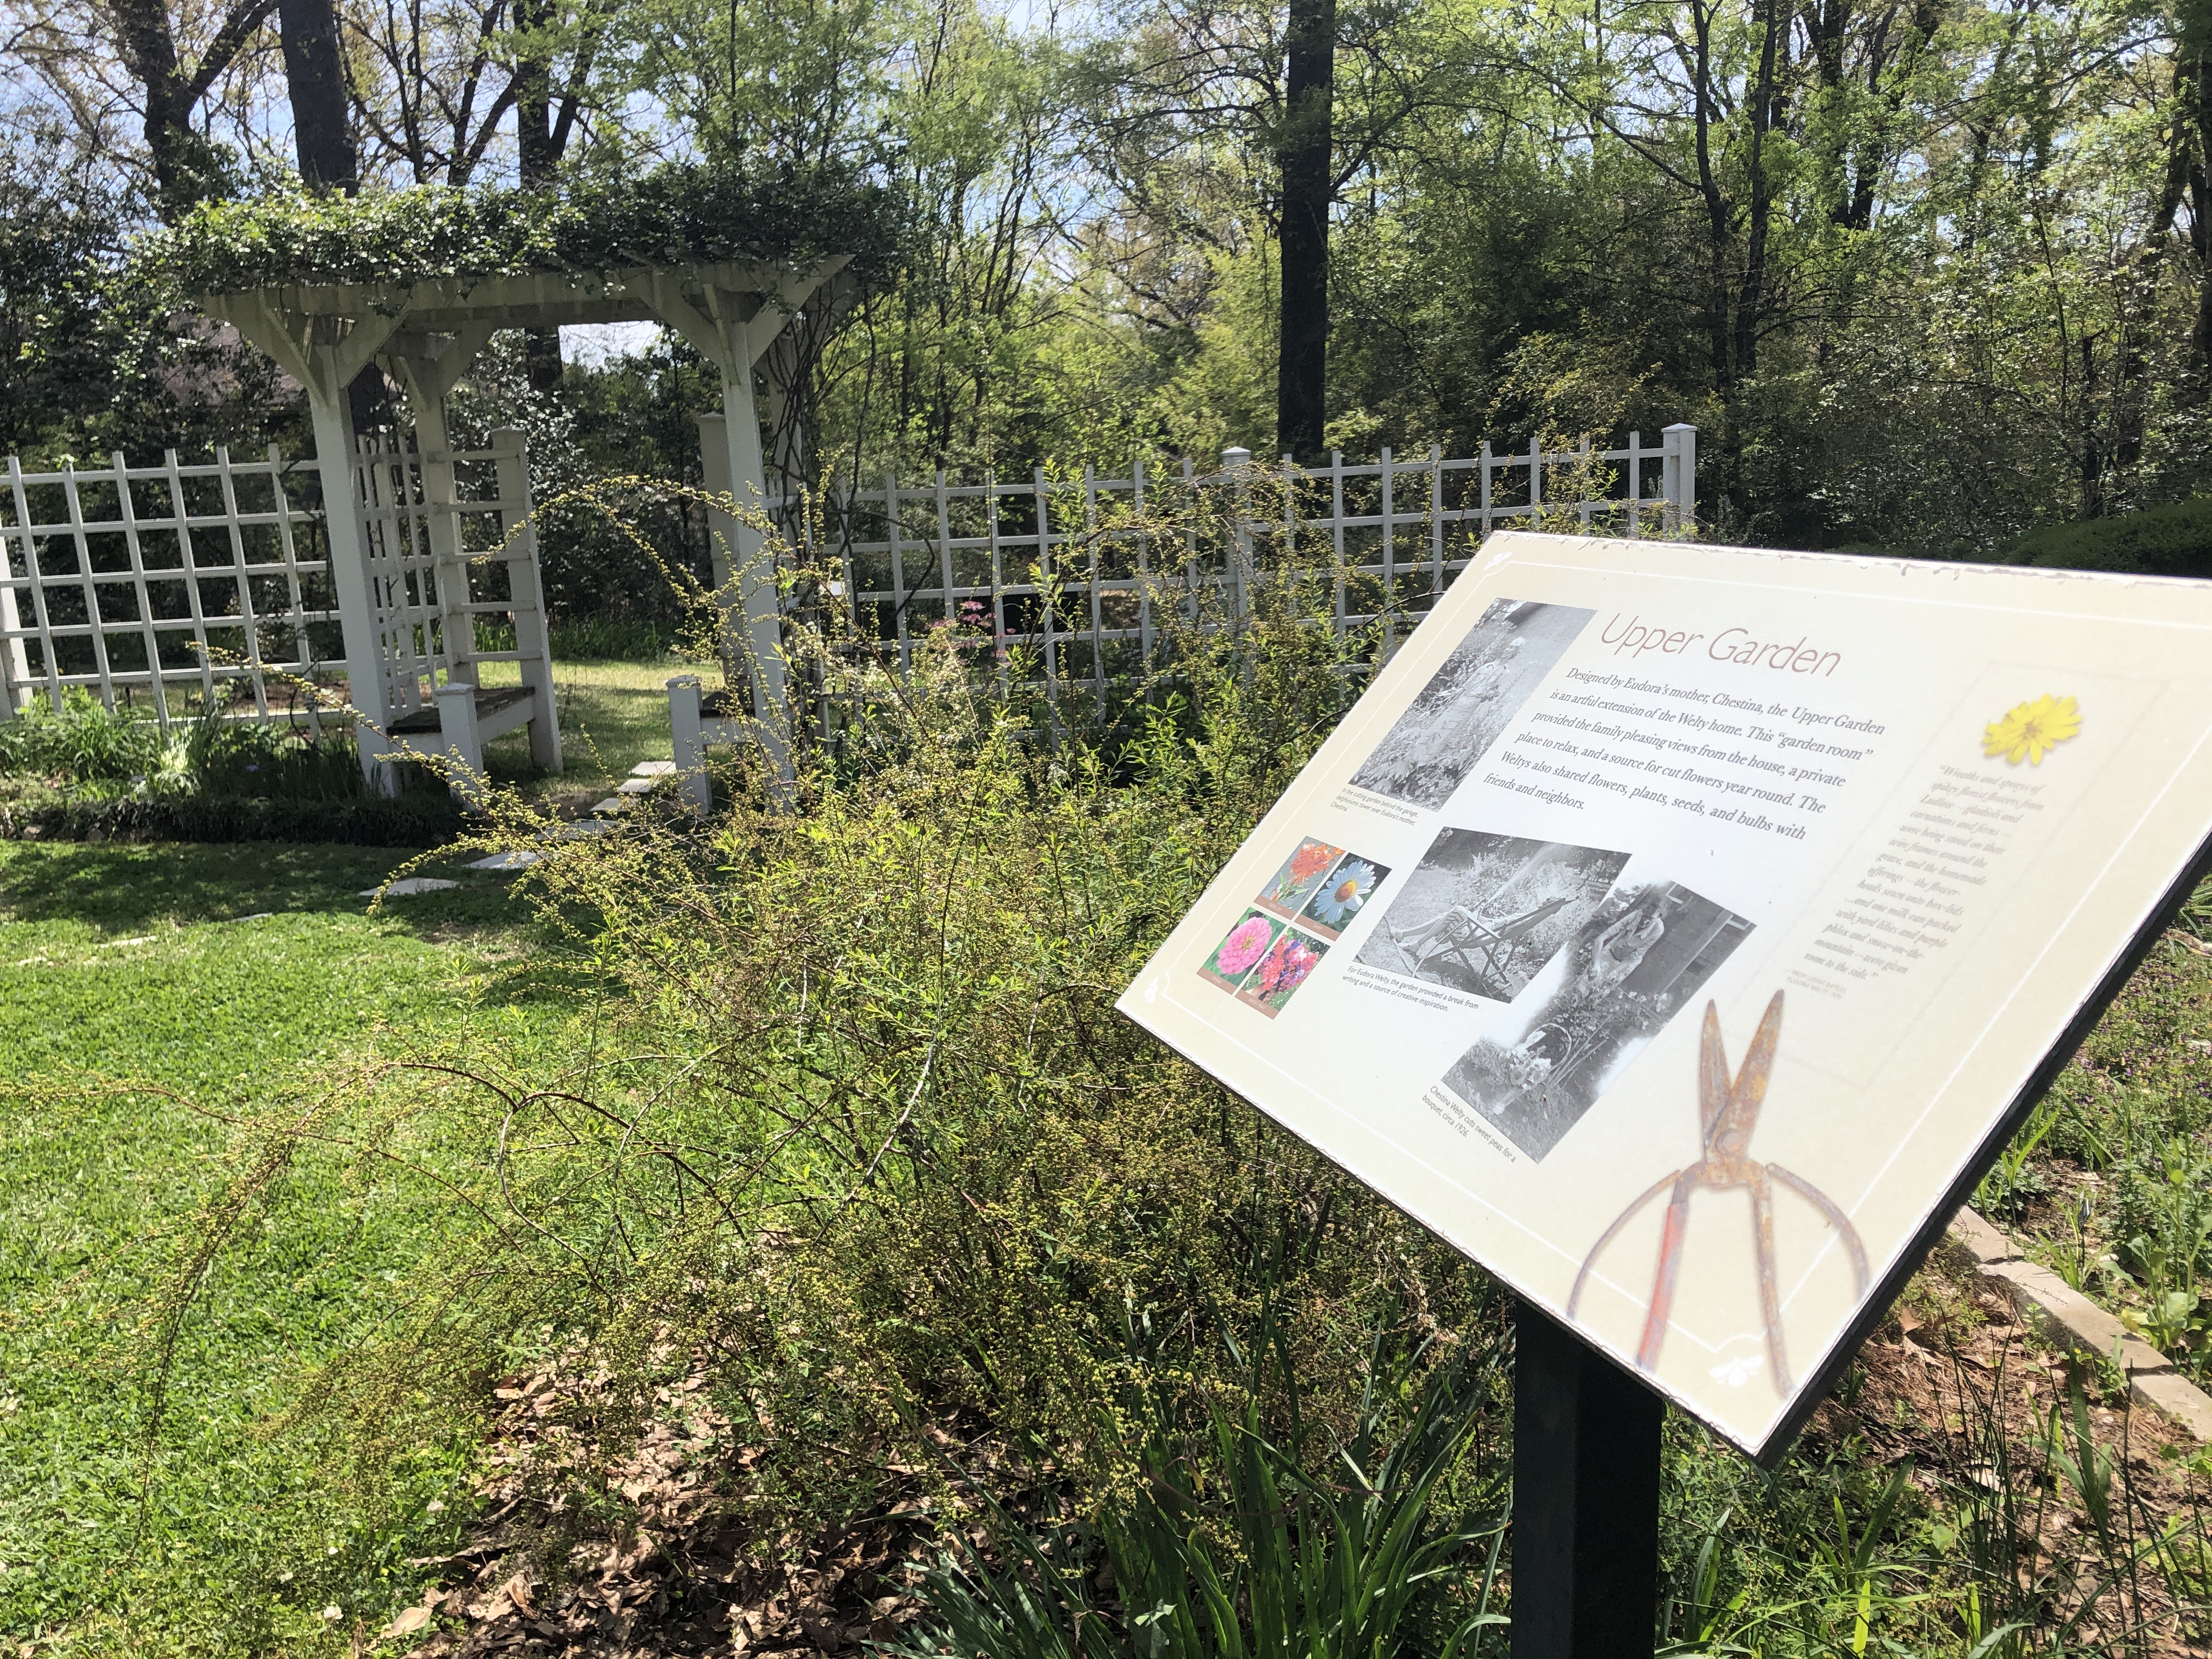 Welty garden interpretive sign in foreground with green Welty lawn and white rose-covered arbor in background